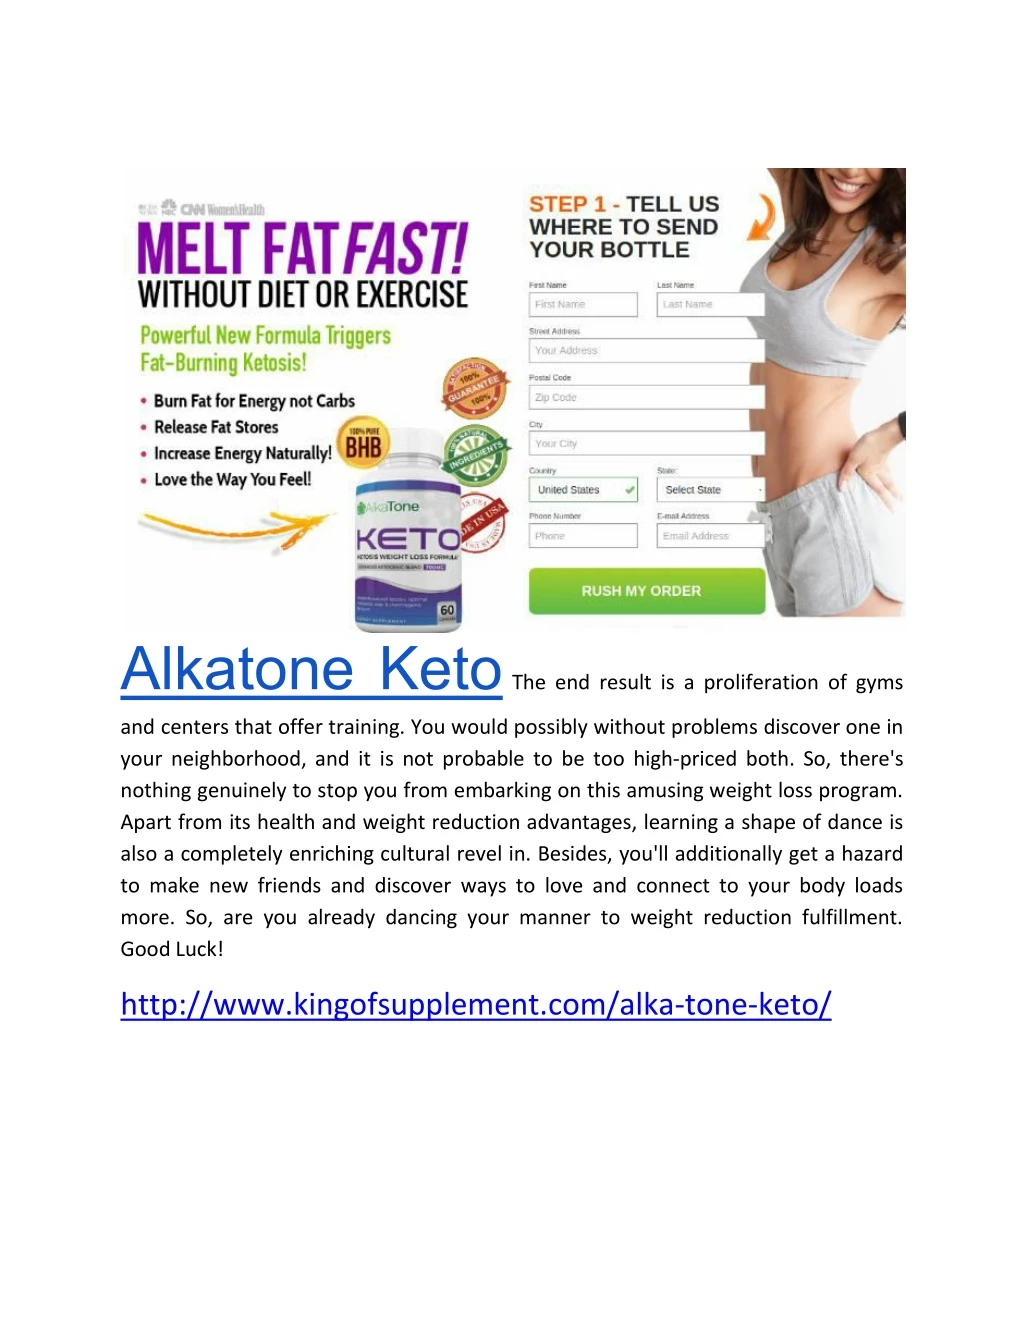 alkatone keto the end result is a proliferation